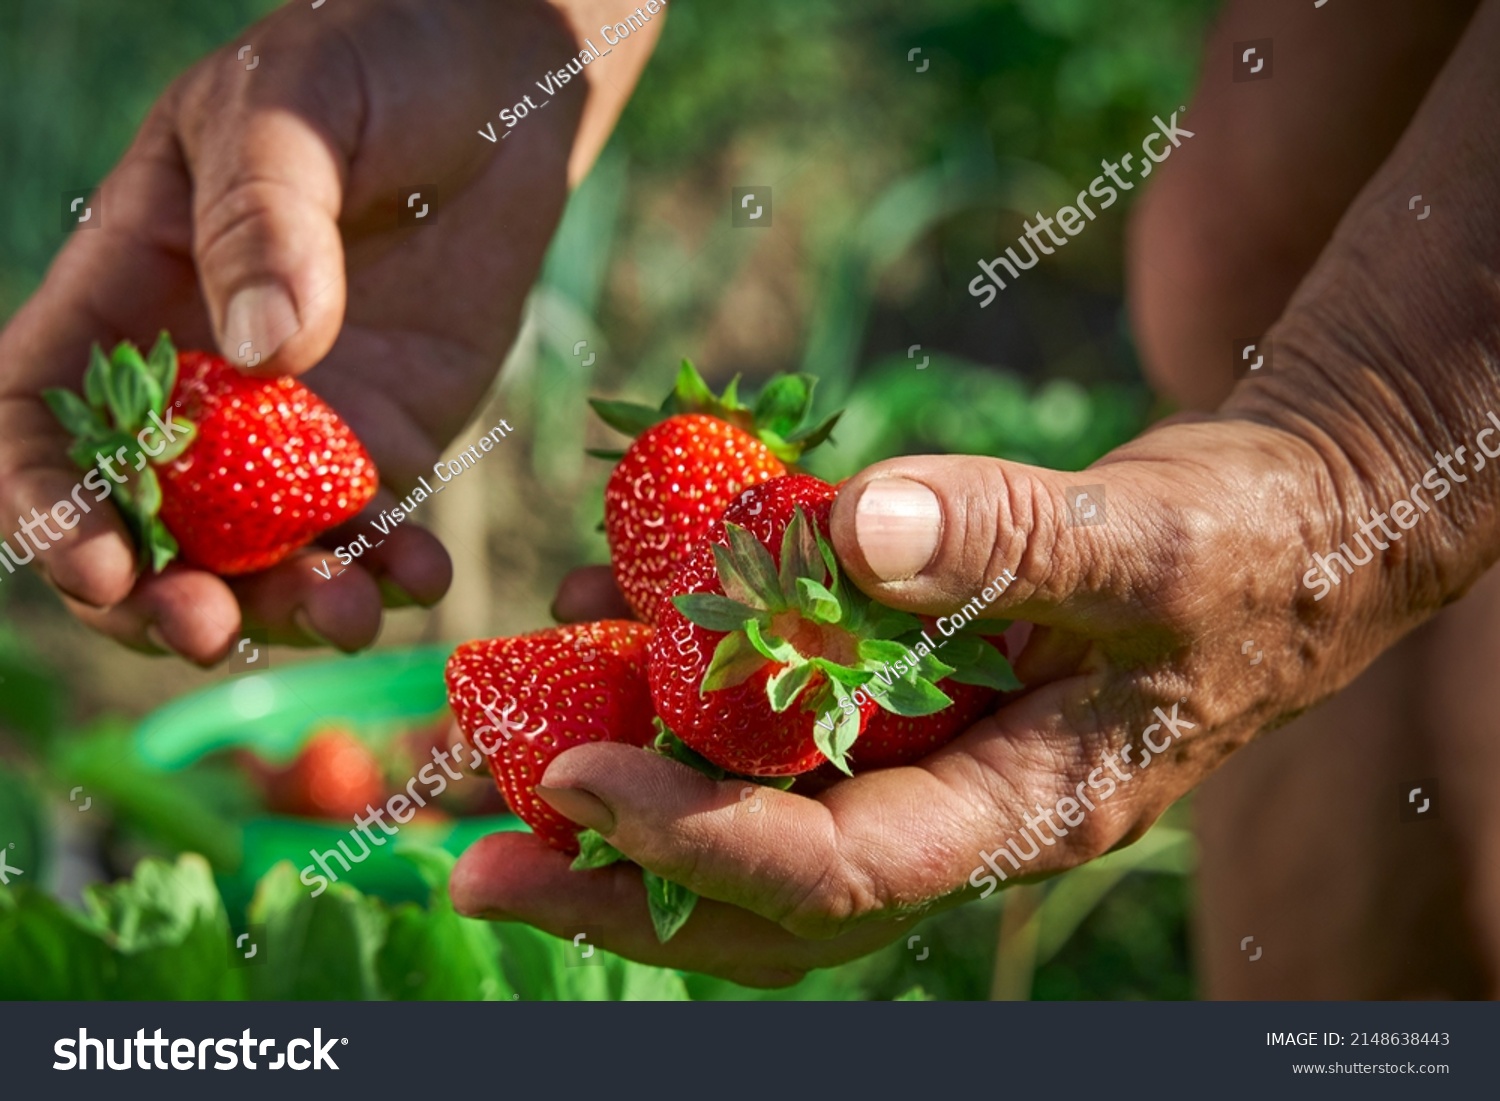 Elderly woman farmer collects a harvest of ripe strawberries. A handful of berries in the hands. Harvesting fresh organic strawberries. Farmer's hands picking strawberries close-up. Strawberry bushes #2148638443